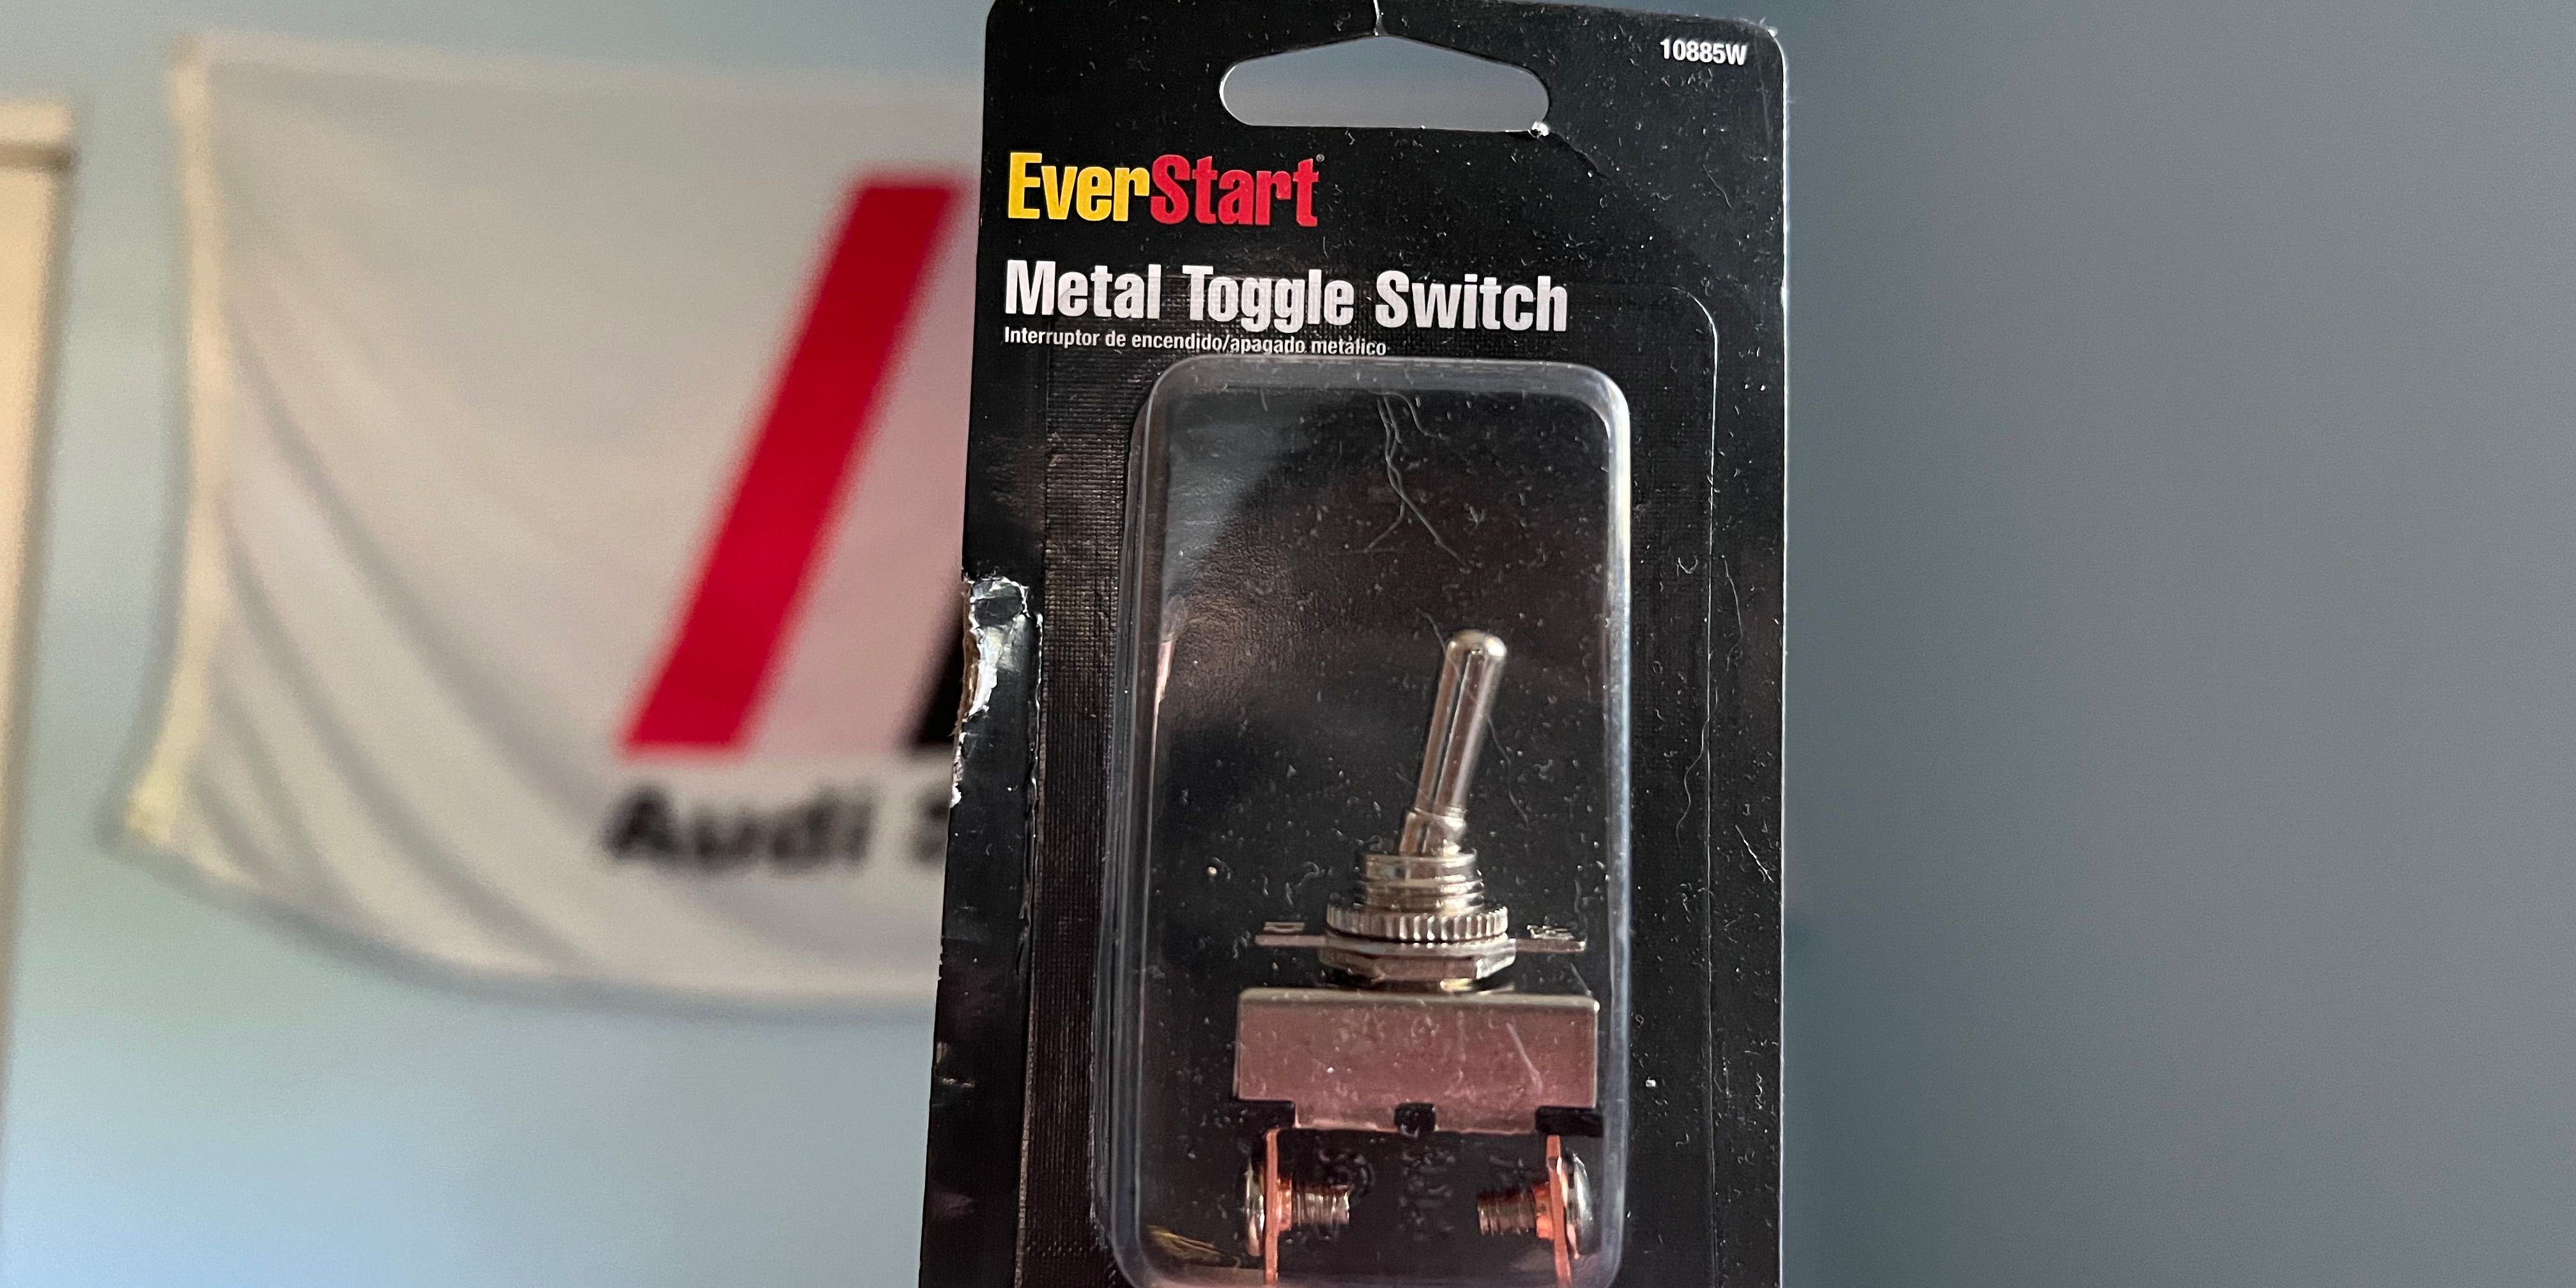 toggle switch that can be used as a kill switch